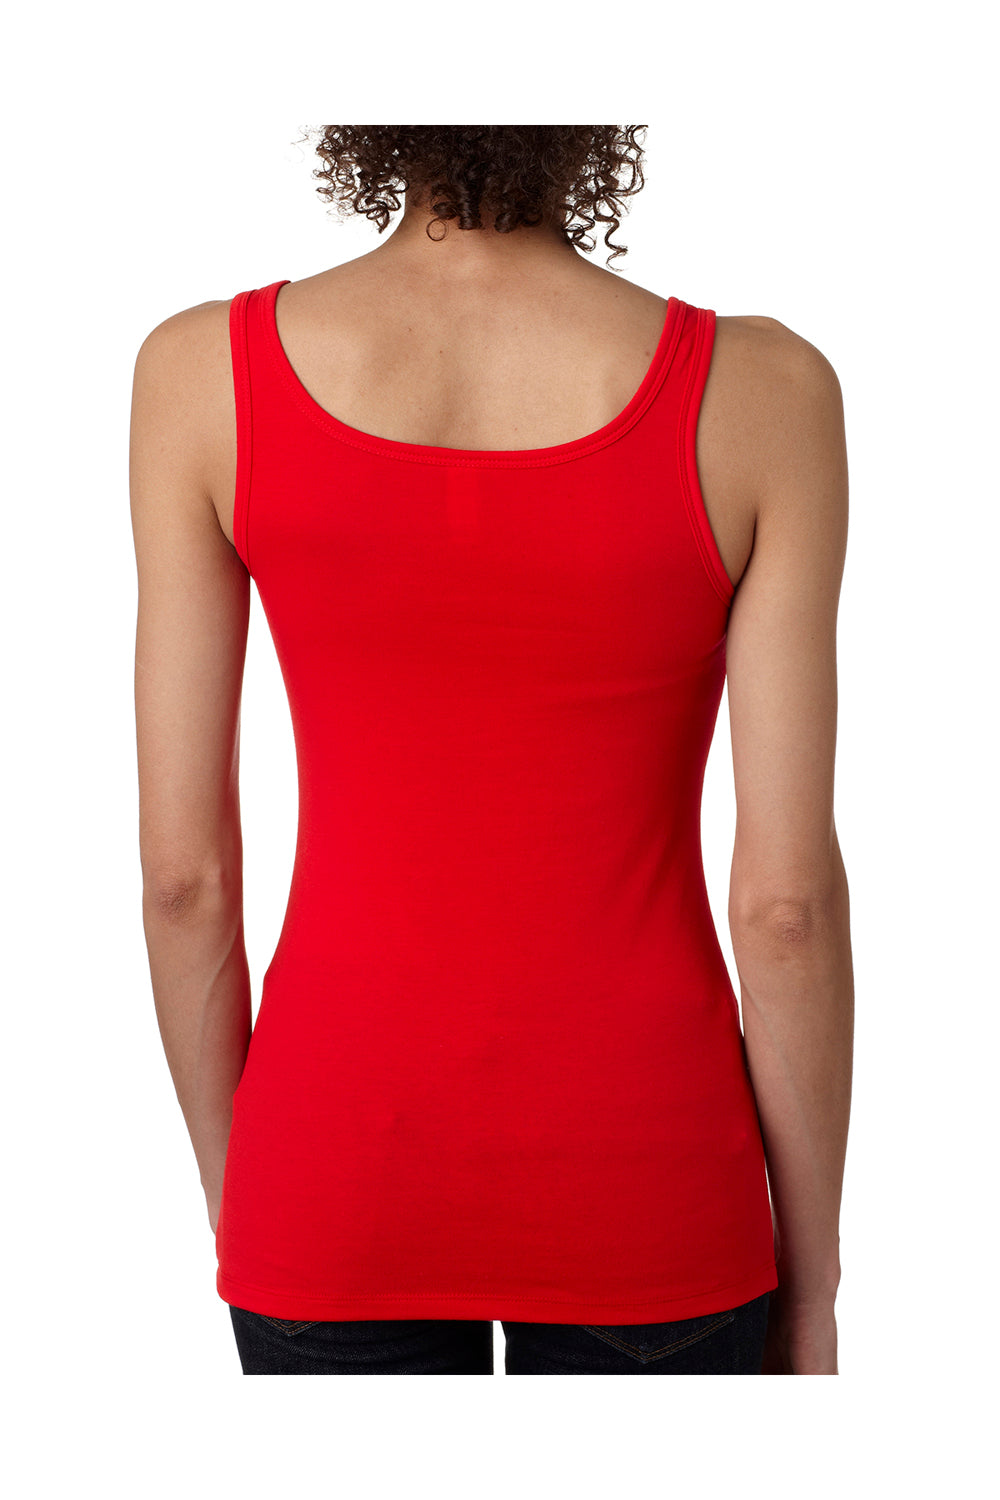 Next Level 3533 Womens Jersey Tank Top Red Back